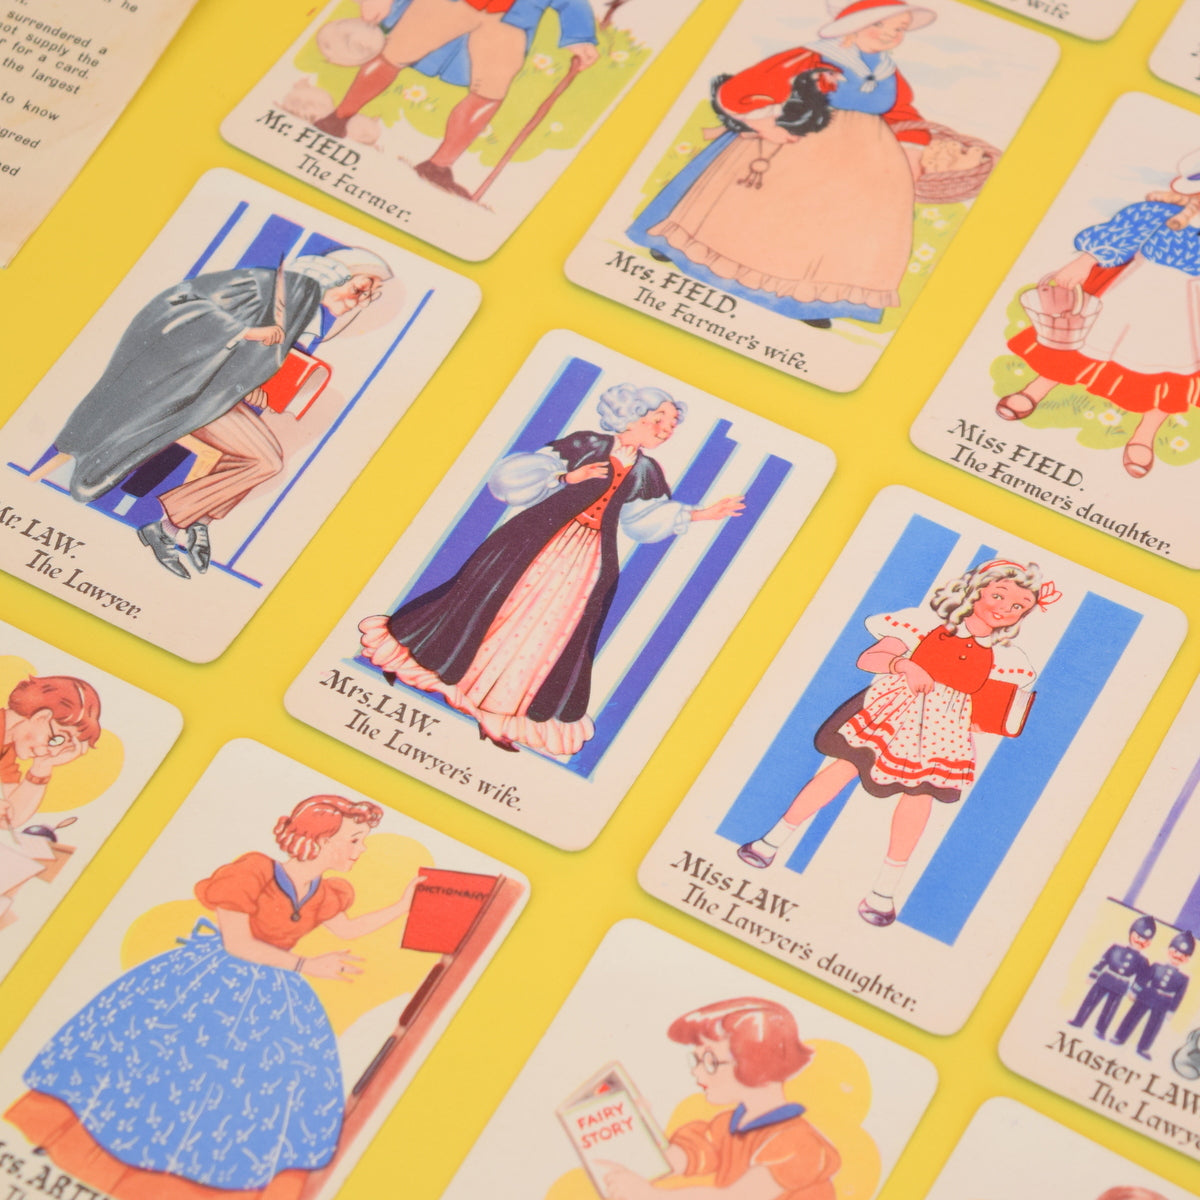 Vintage 1950s Happy Families Card Game - Fantastic Images - Ideal For Framing